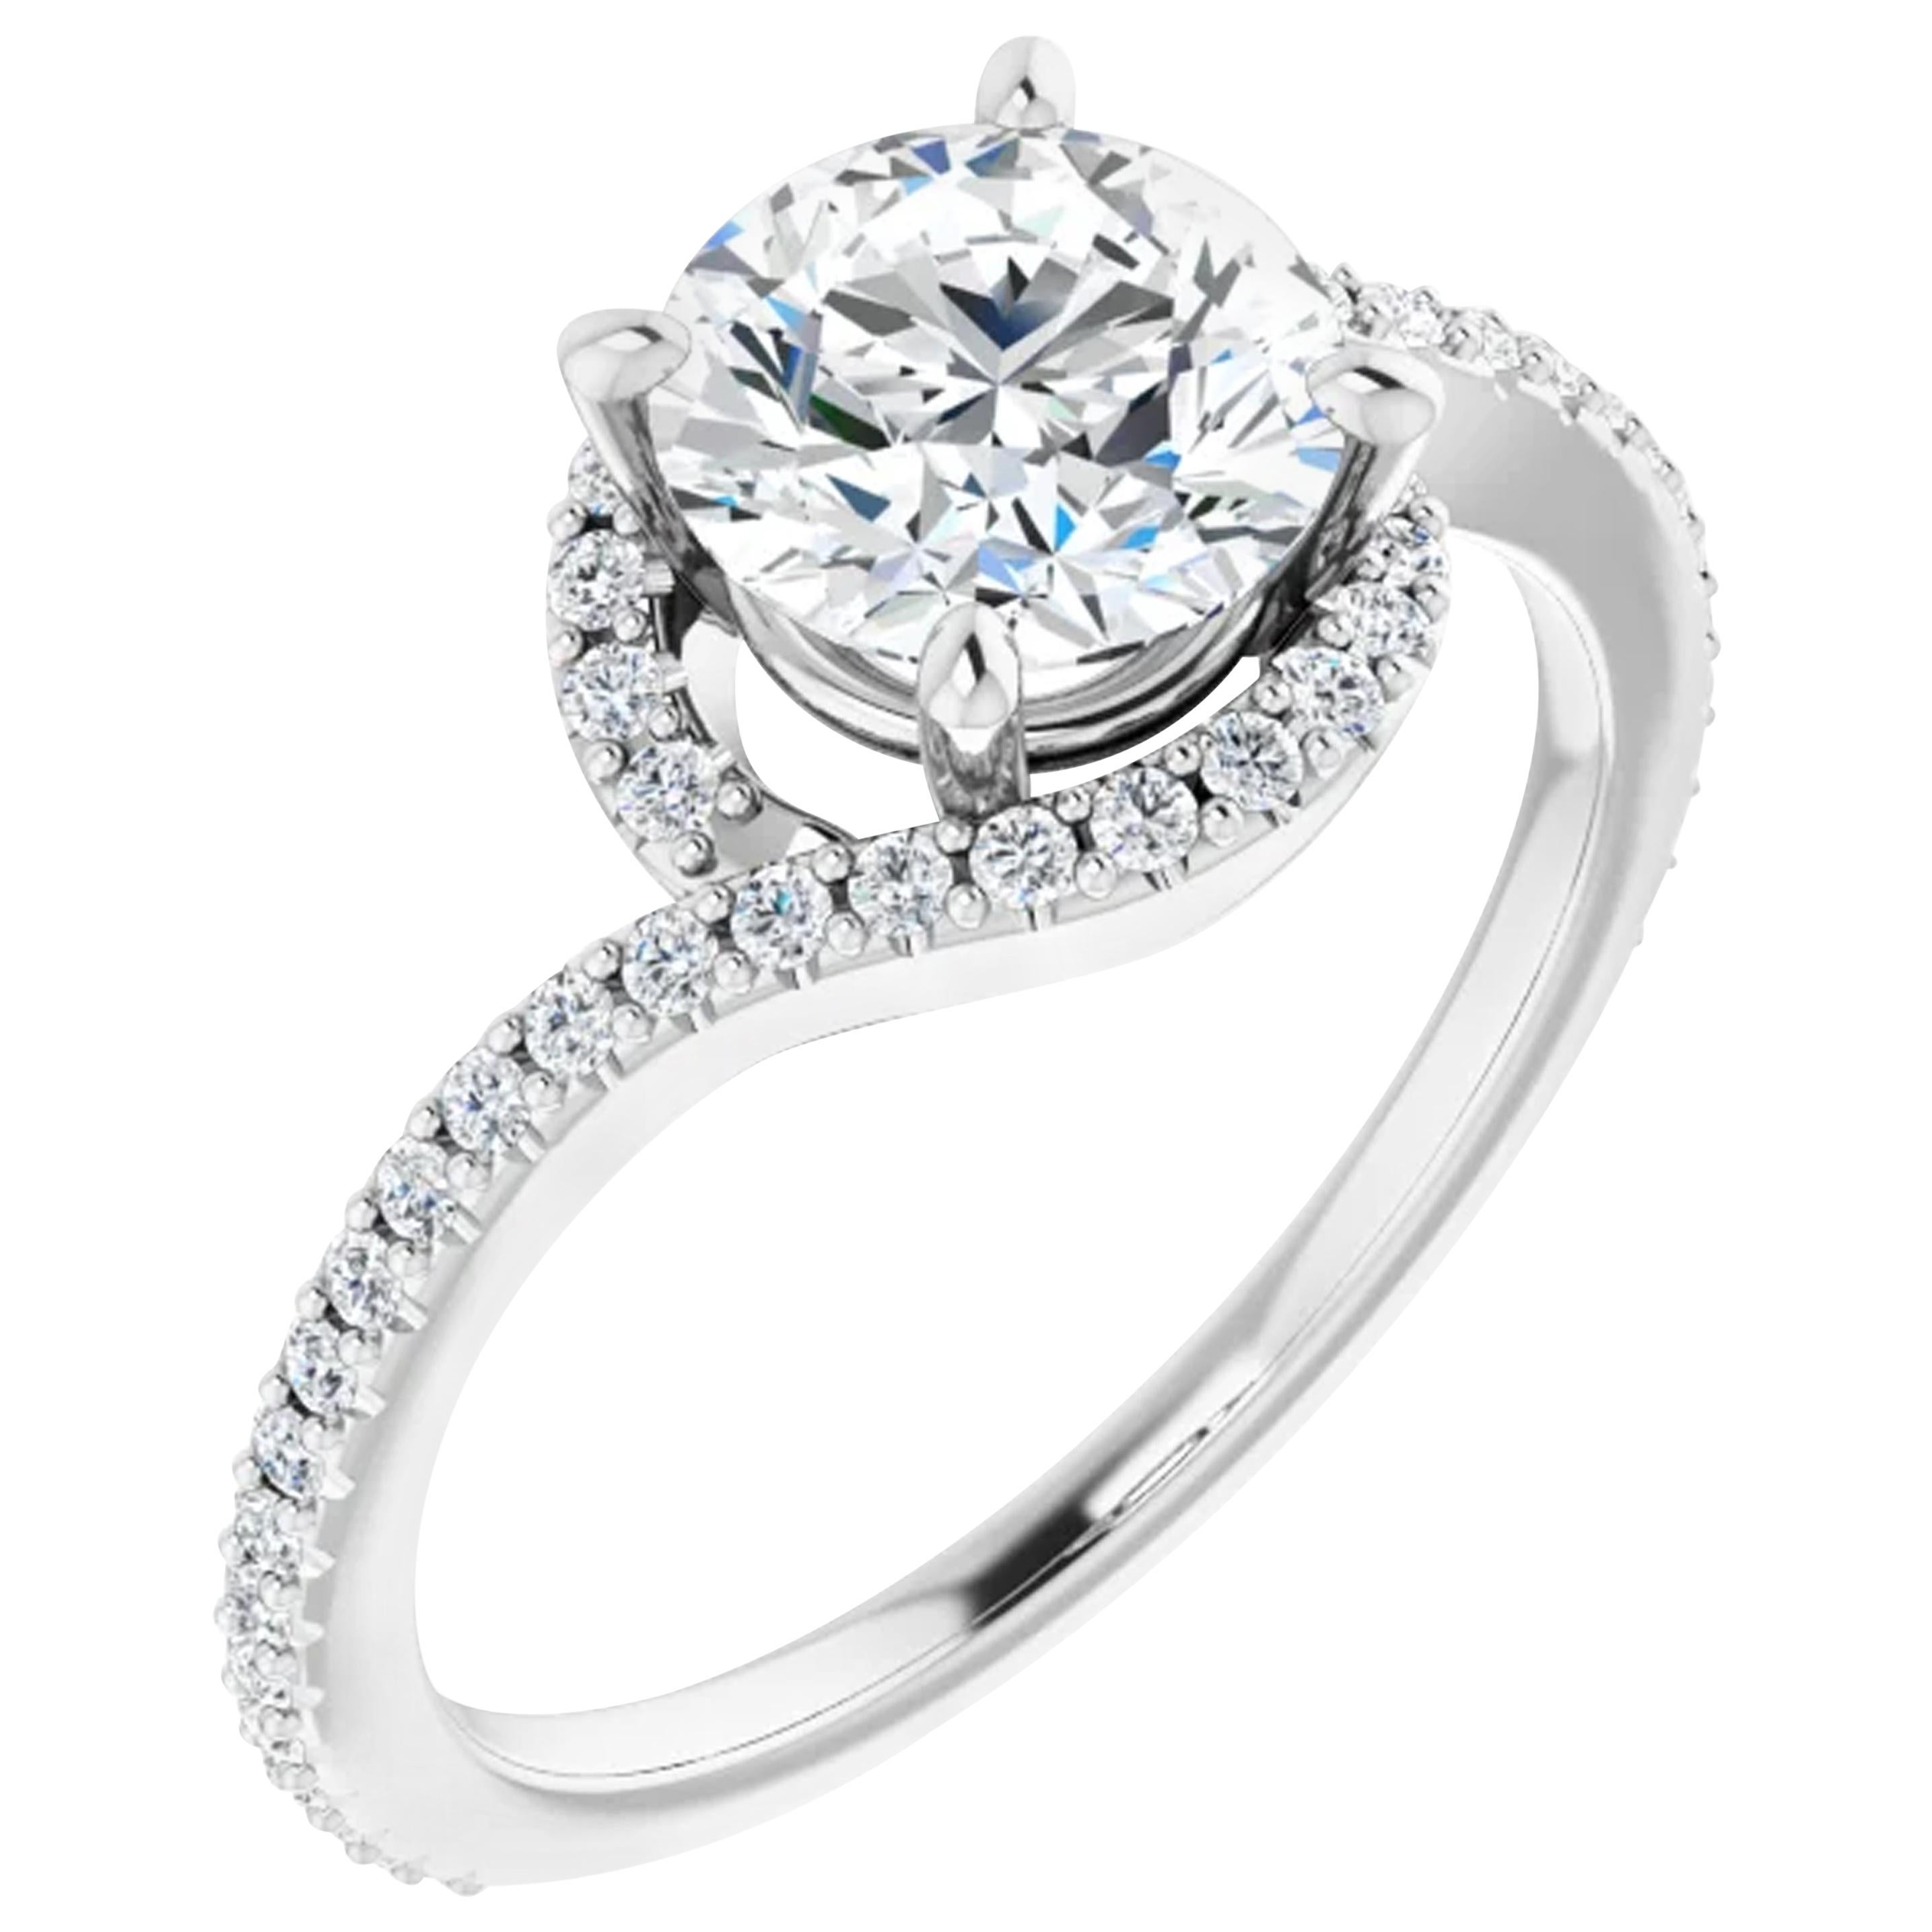 Swirl Bypass Halo GIA Round Brilliant White Diamond Engagement Ring 1.27 Carats For Sale